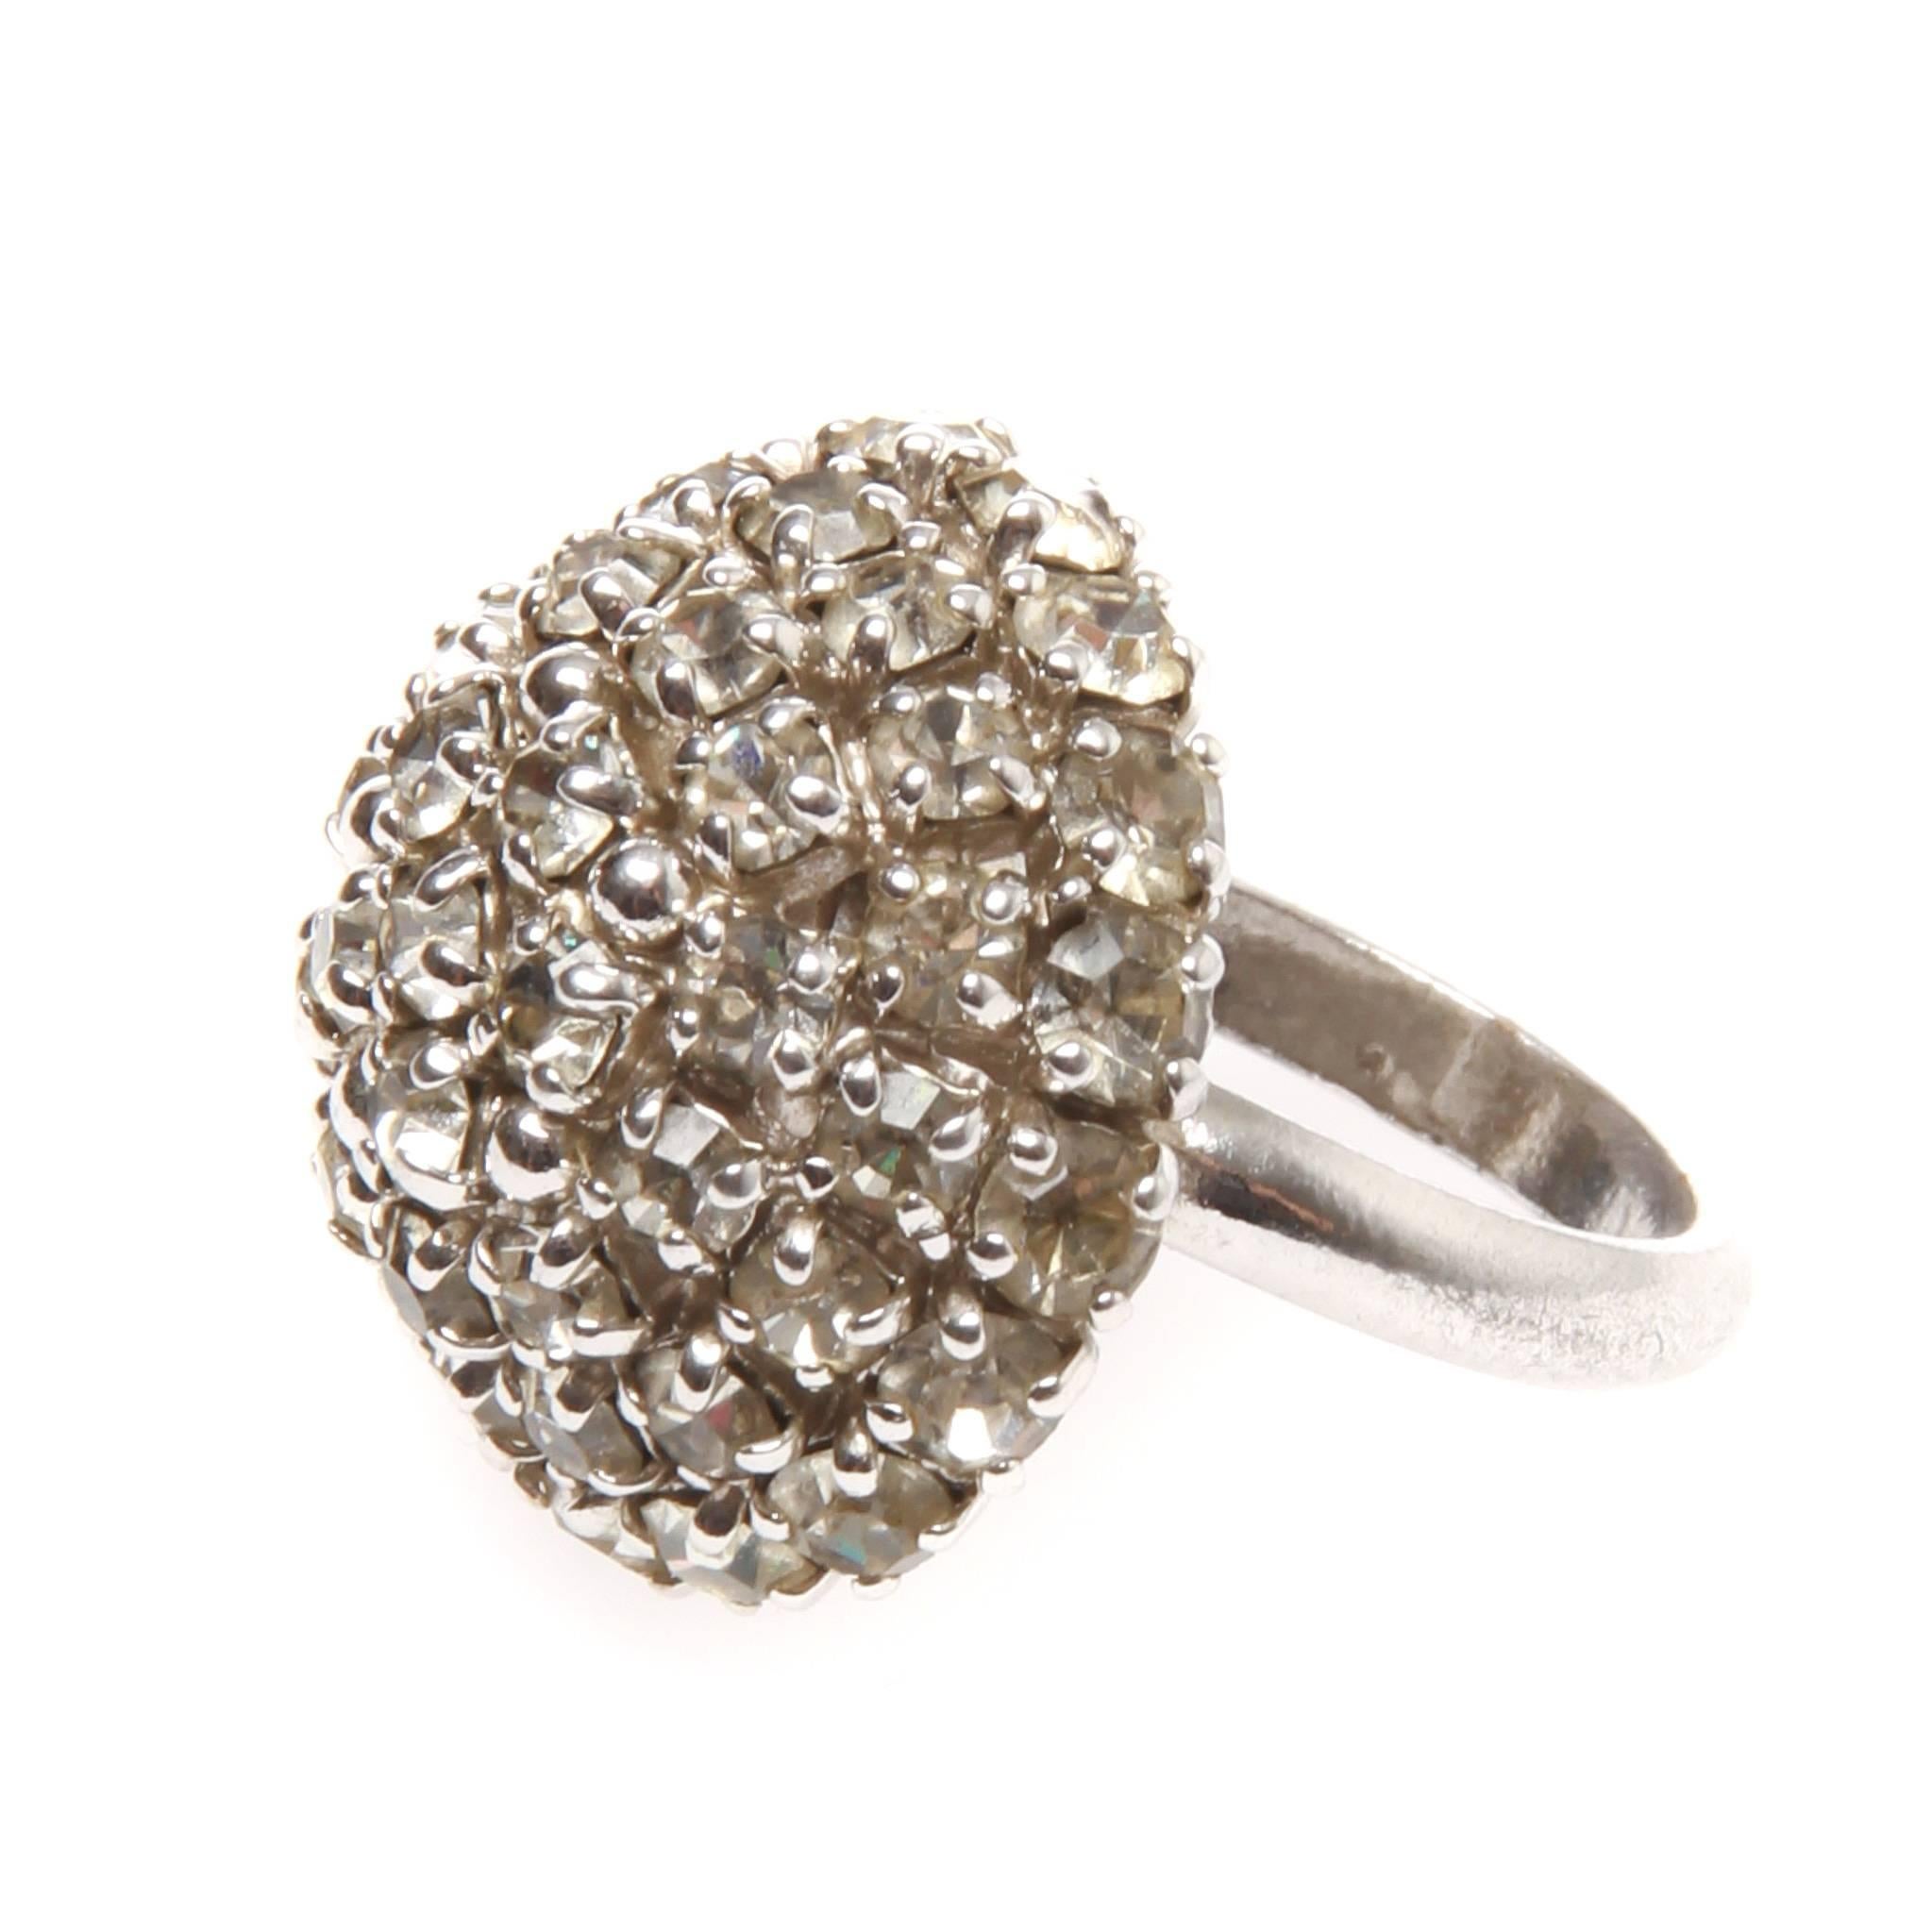 A collectable vintage massive crystal rhinestone dome cocktail ring by CHRISTIAN DIOR. Made in the 1970's

Intricately crafted with round crystal rhinestones are arranged in a dimensional dome shape and are all prong set.
It is signed 